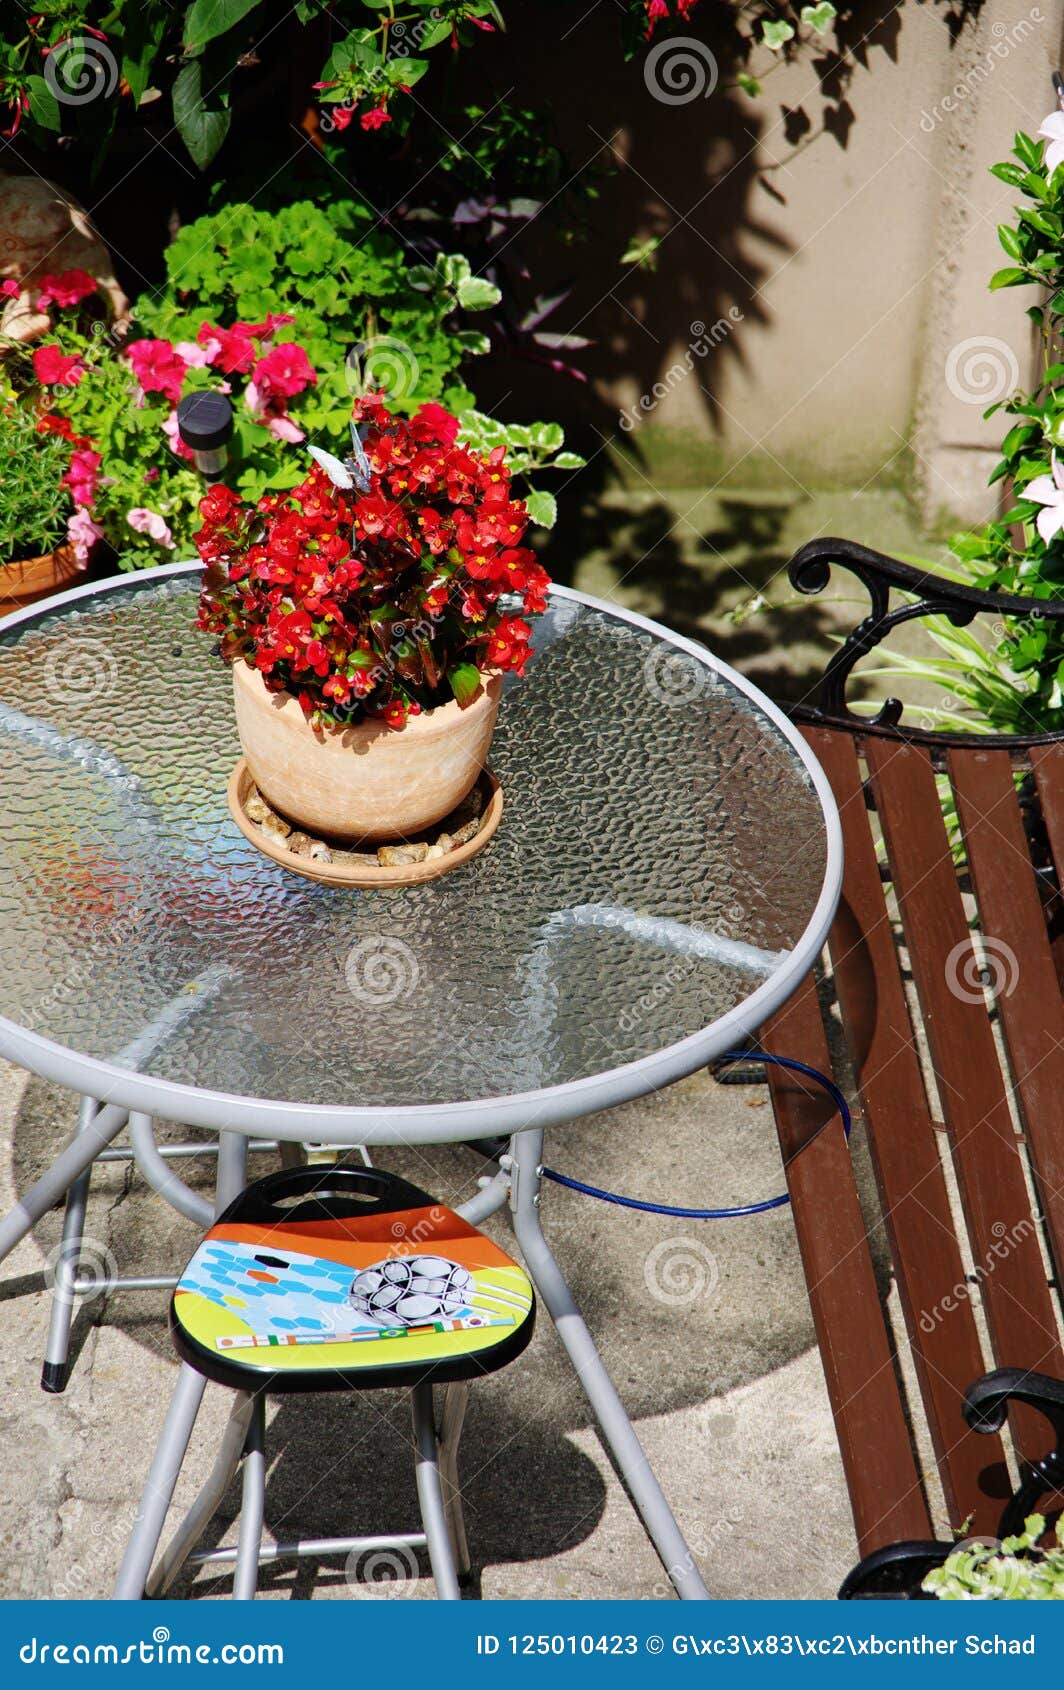 Round Garden Table With Glass Top And Flower Pot Stock Image